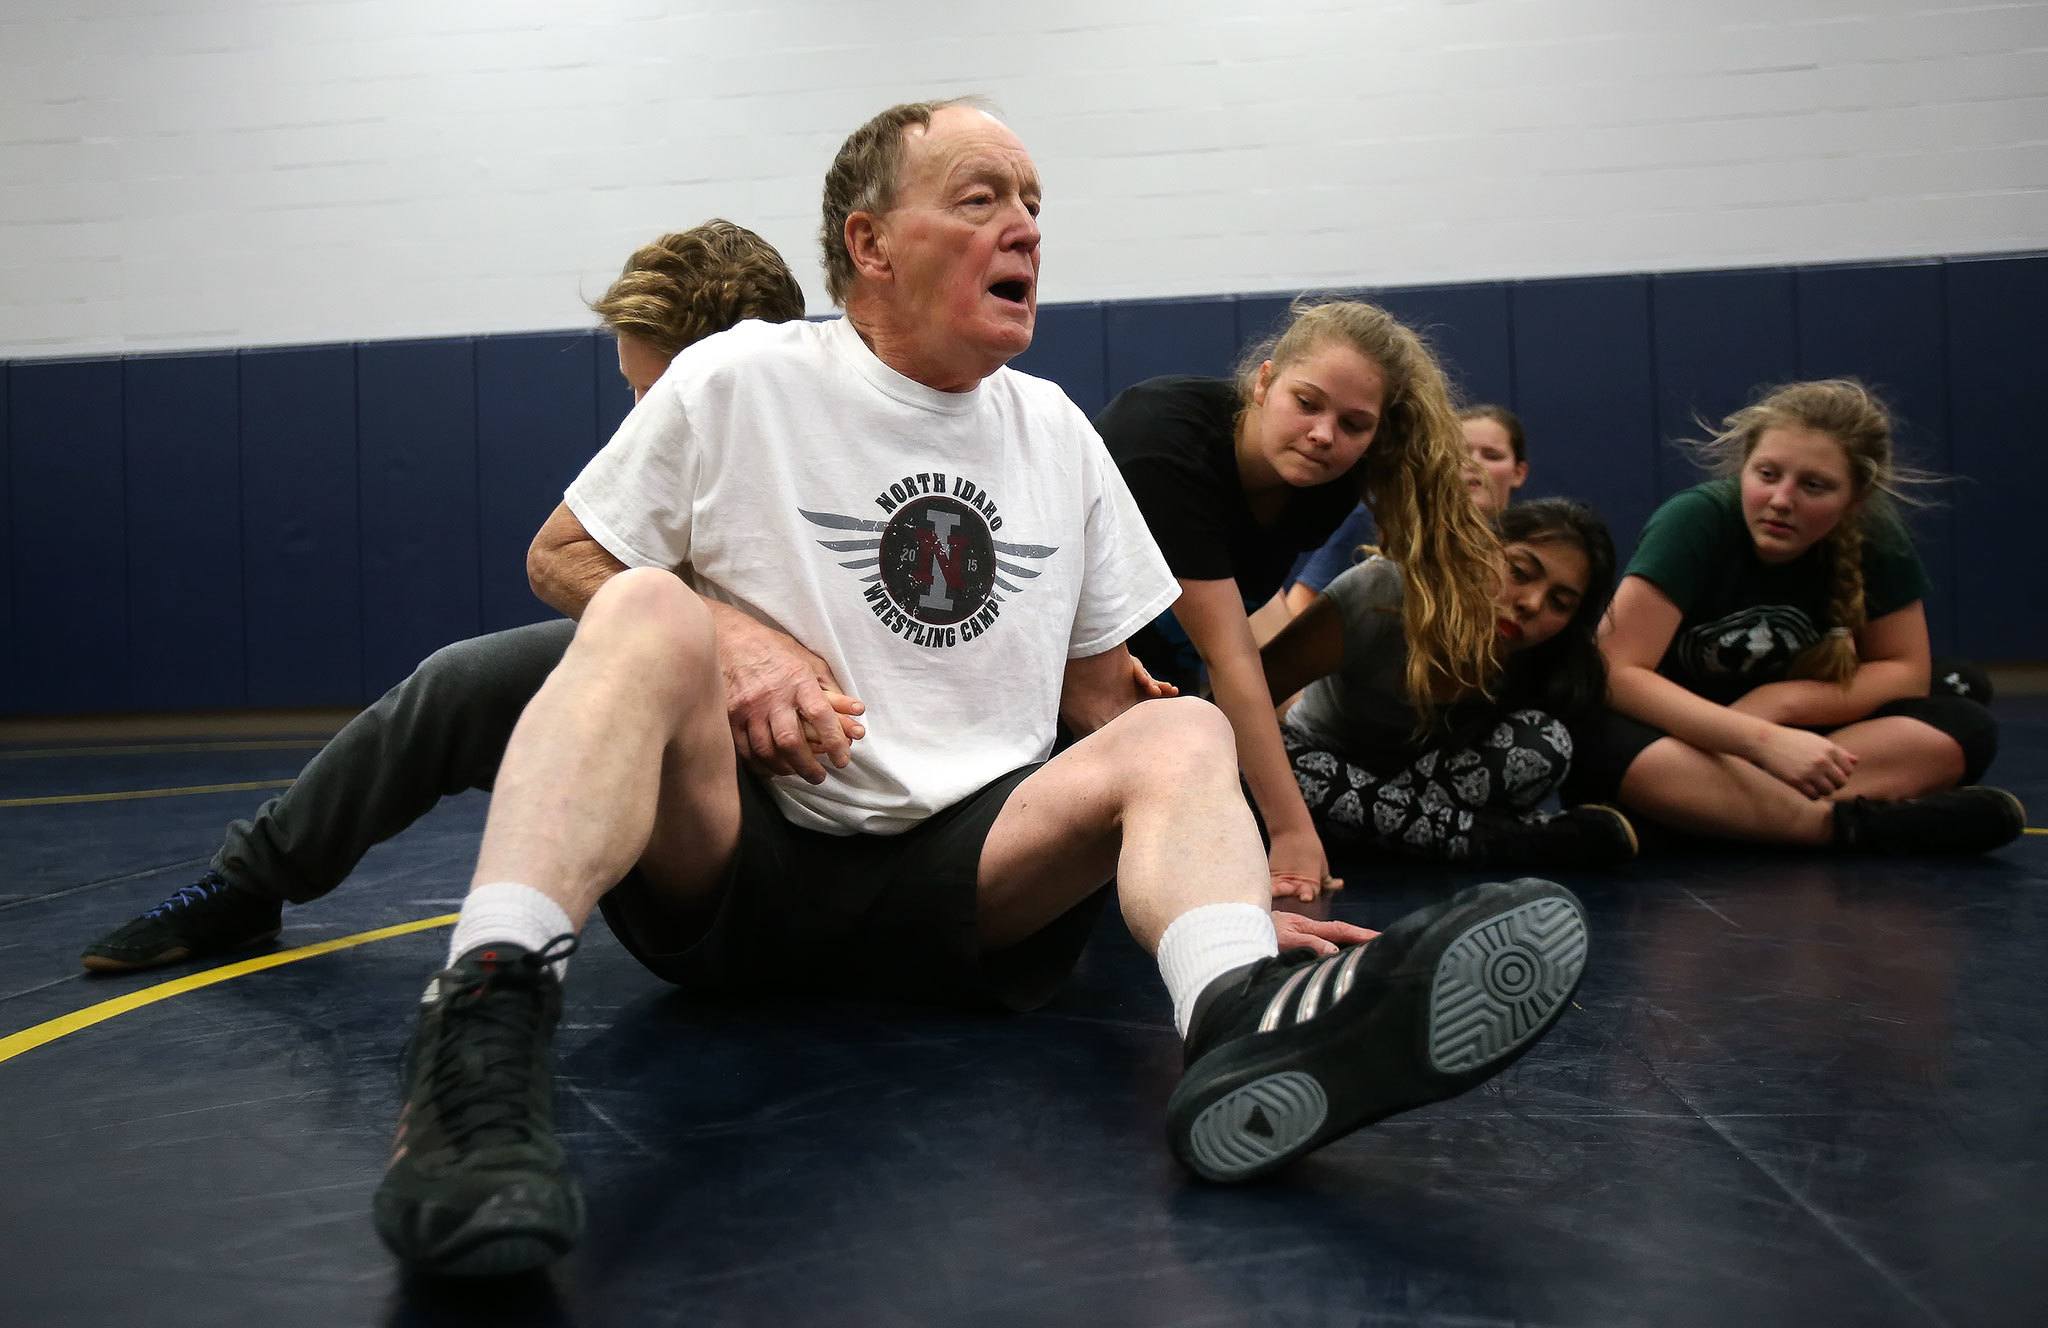 Rick Iversen demonstrates a maneuver as he coaches the Everett girls wrestling team during practice on Wednesday. (Andy Bronson/The Herald)